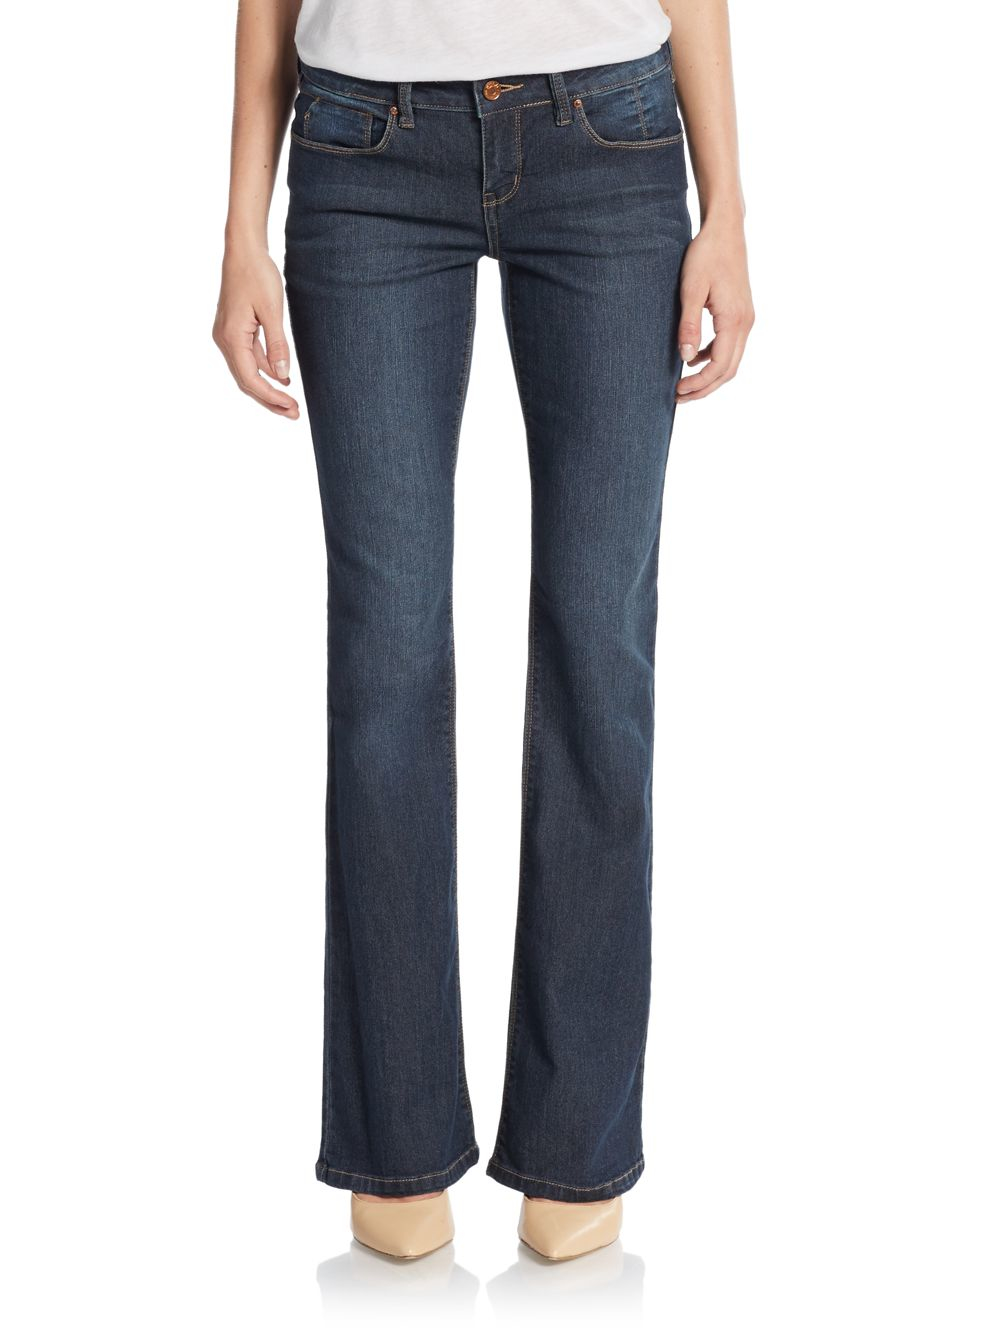 Lyst - Sold Design Lab Virtual Bootcut Jeans in Blue